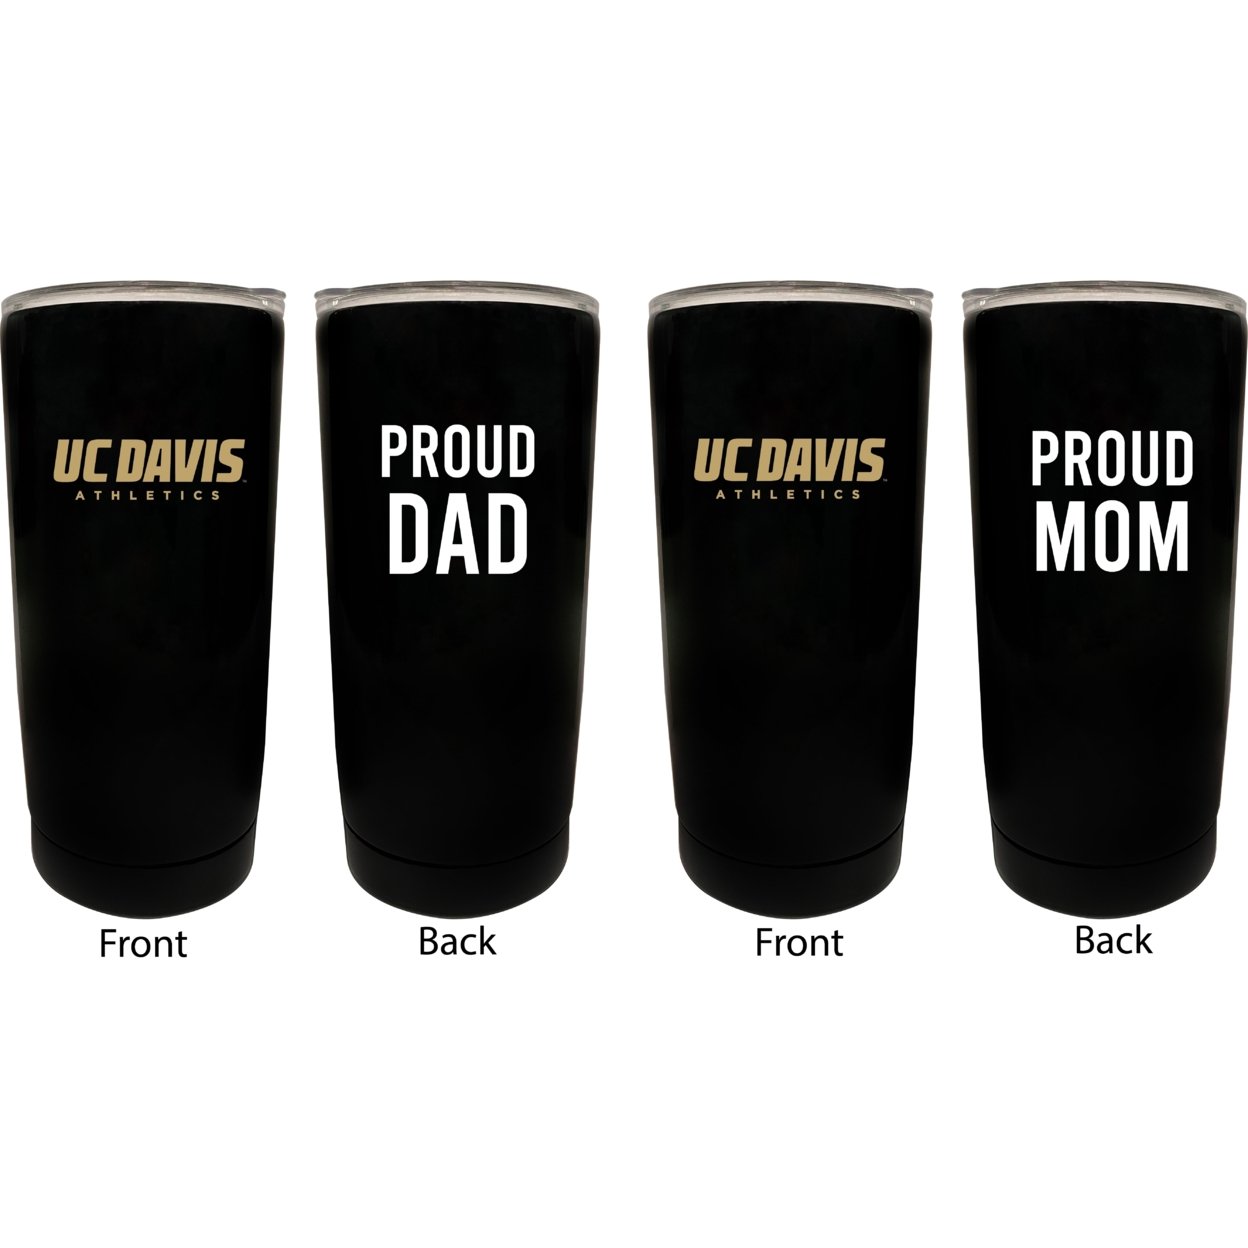 UC Davis Aggies Proud Mom And Dad 16 Oz Insulated Stainless Steel Tumblers 2 Pack Black.